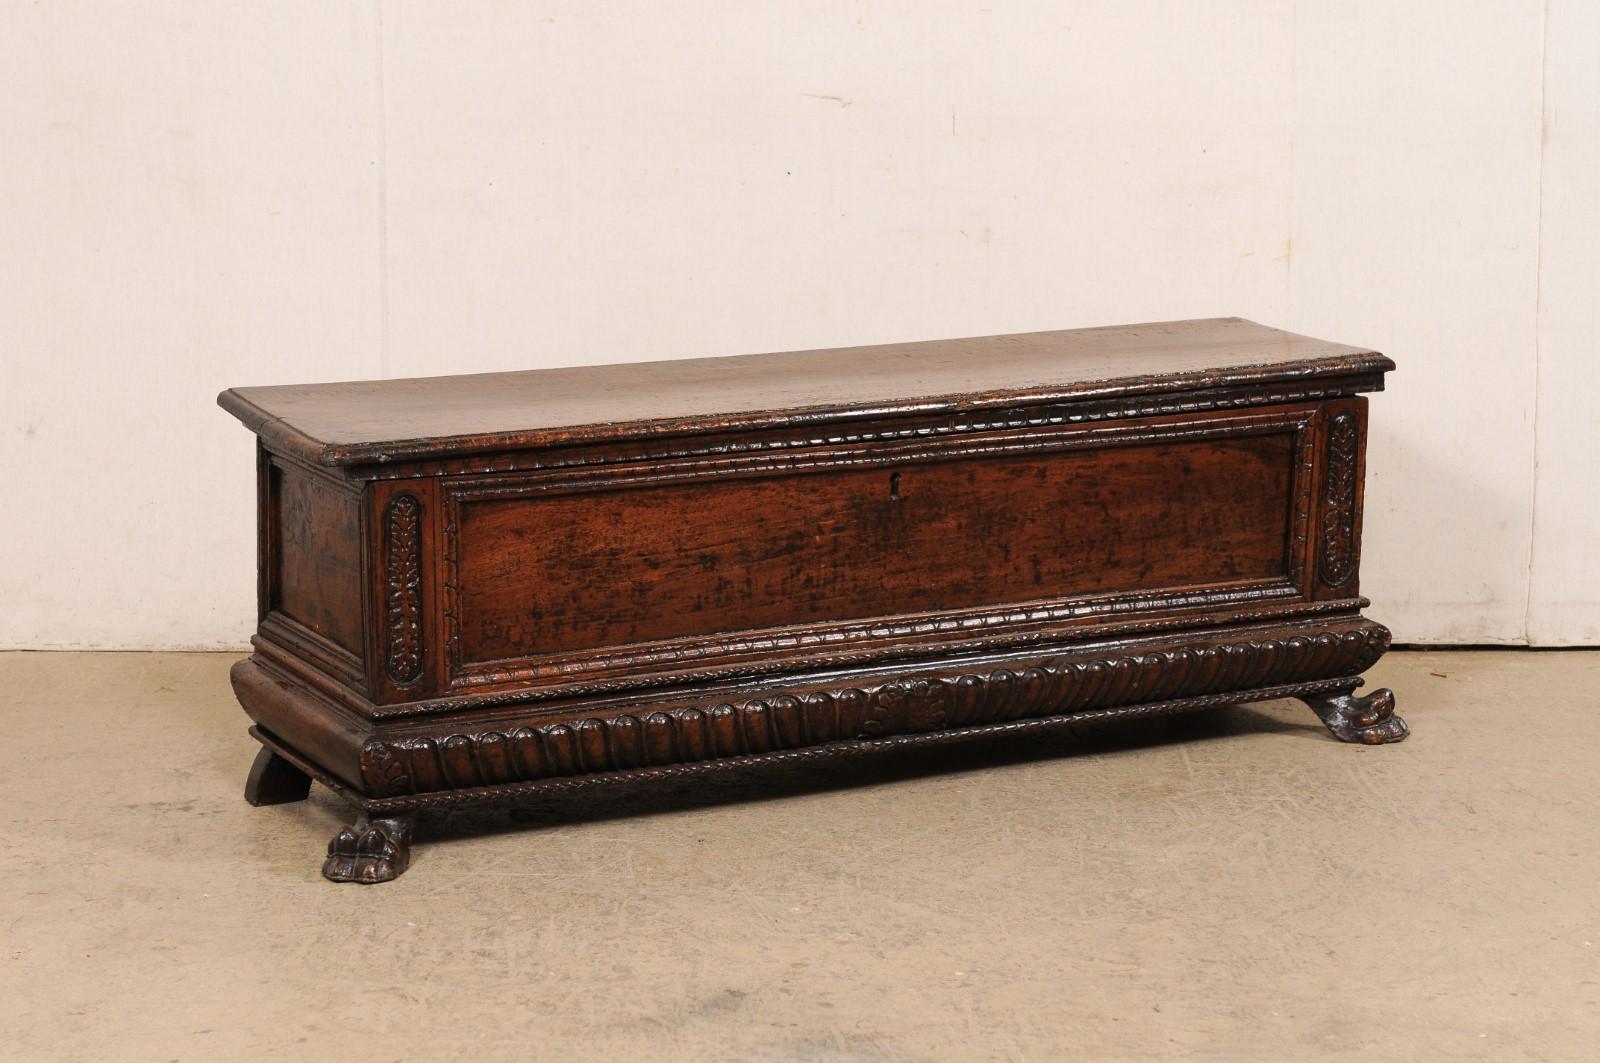 An Italian carved-wood cassone bench with storage from the 18th century. This antique seating bench from Italy has a recessed panel design and front and both short sides; adorned in thickly carved trim and molding with raised oval-shaped foliate